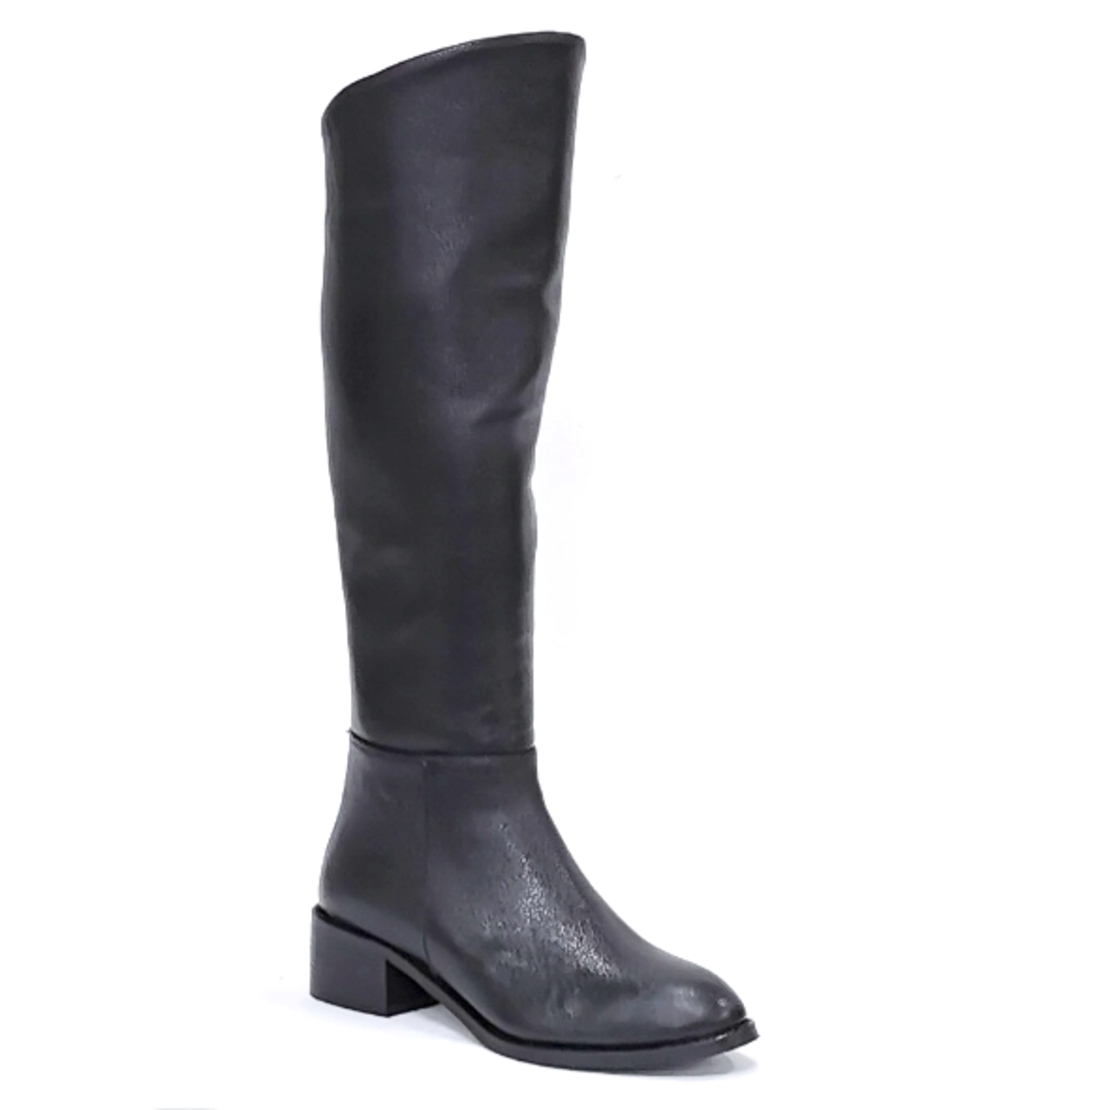 Women's elegant boots made of natural leather in black/73291